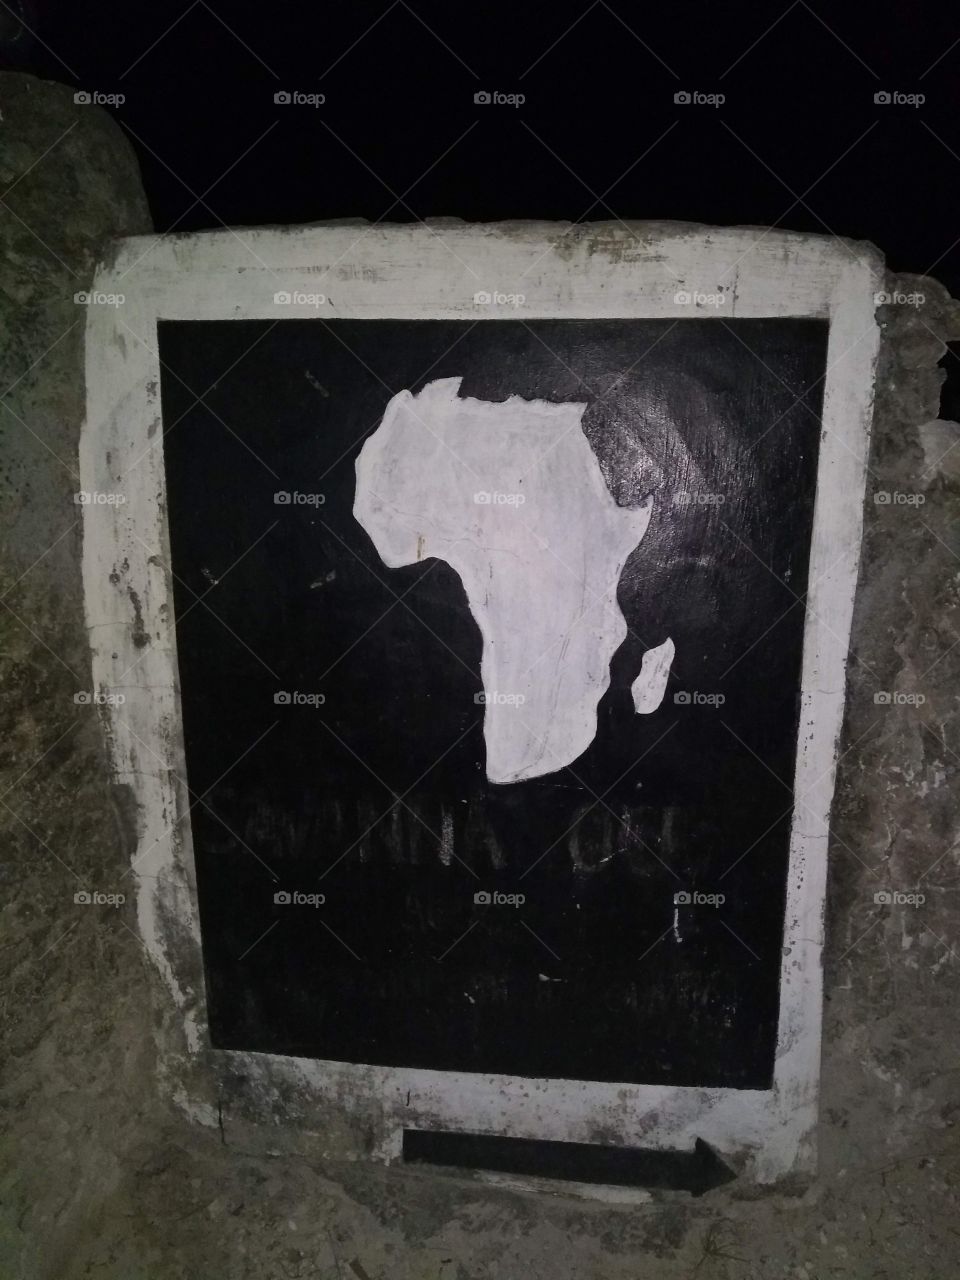 Africa on African's wall